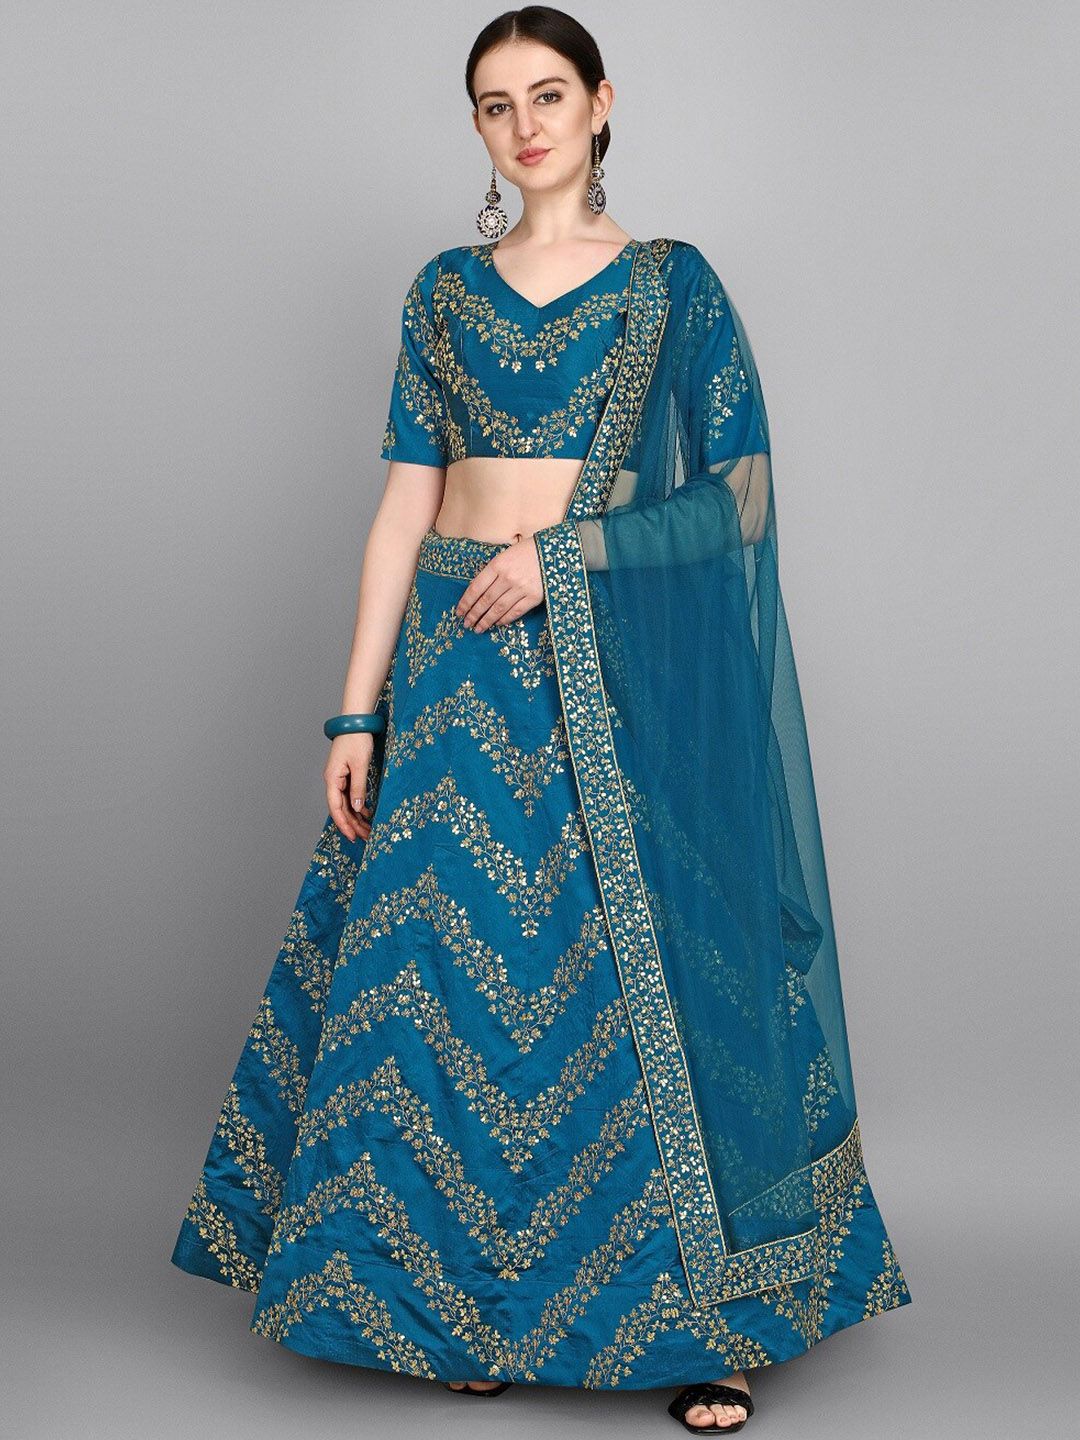 Fashion Basket Teal Blue & Golden Semi-Stitched Lehenga & Unstitched Blouse With Dupatta Price in India